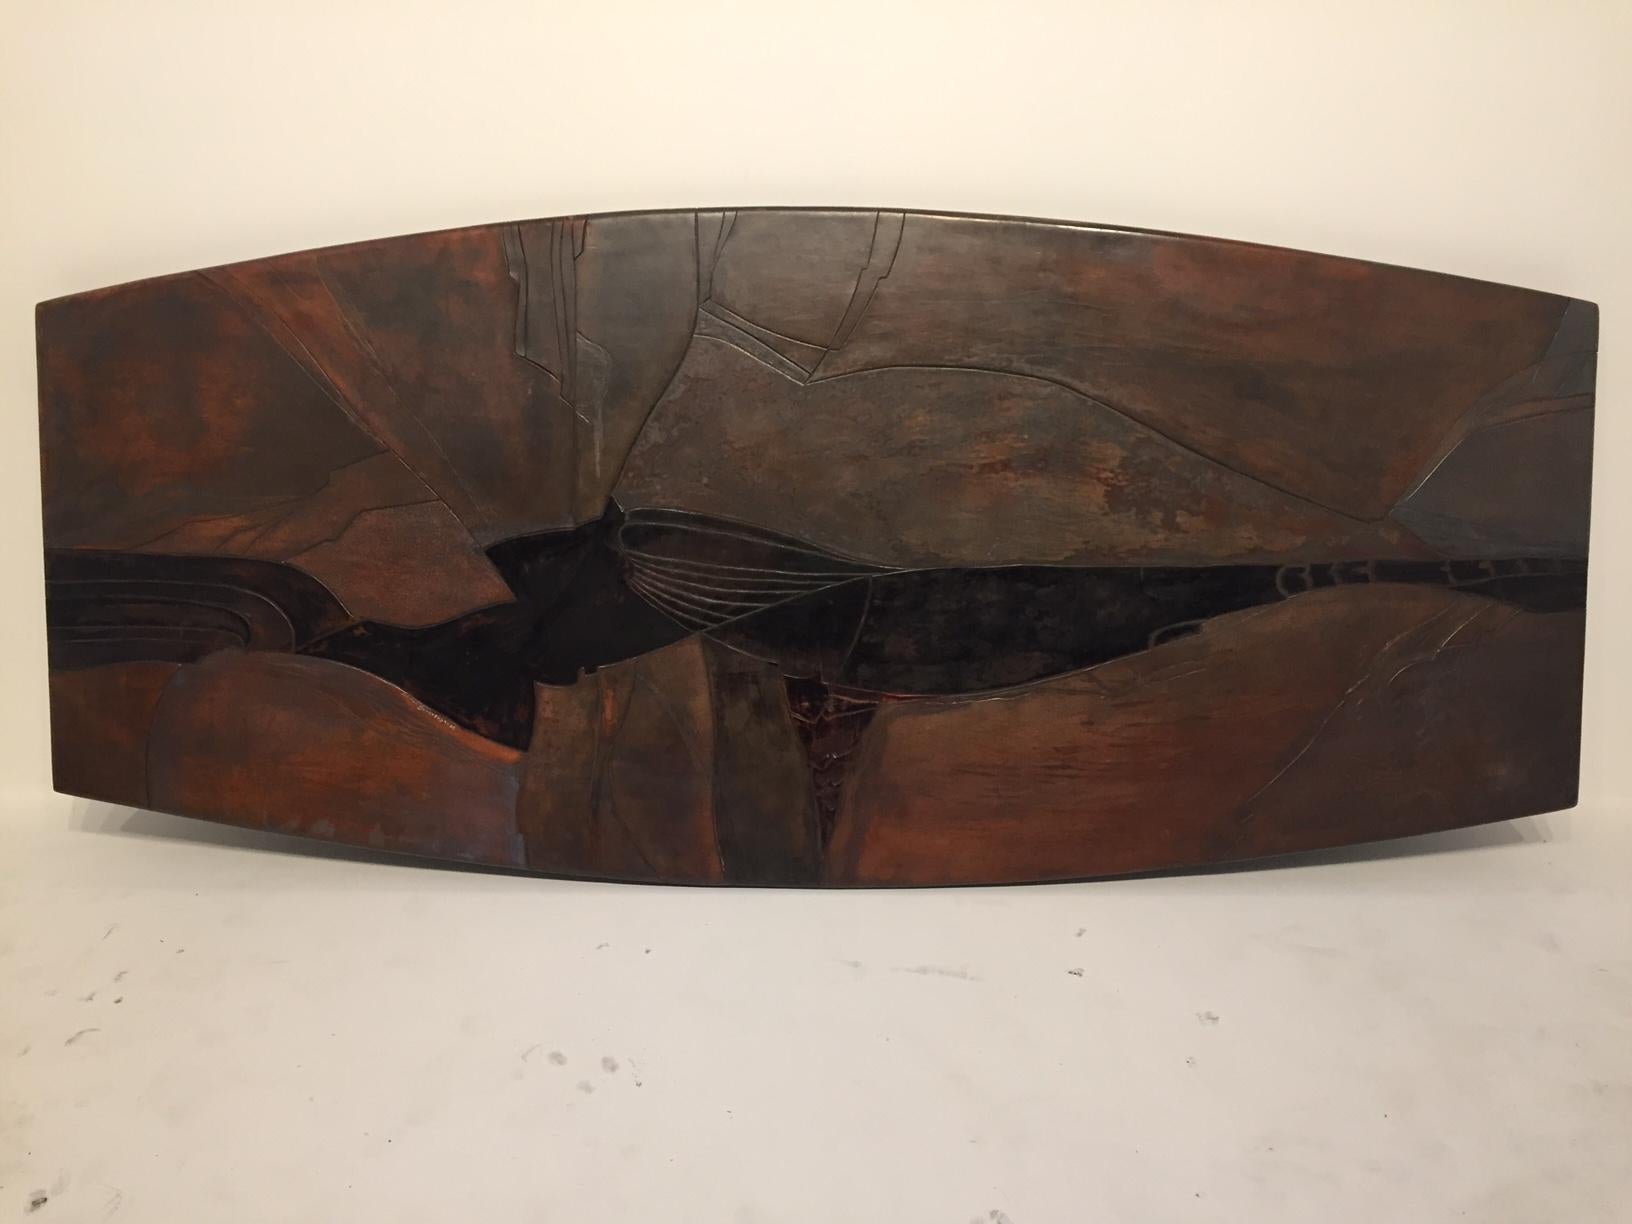 Leather Table Signed by Armand Jonckers, Belgium, 1980 im Zustand „Gut“ im Angebot in Saint-Ouen, FR